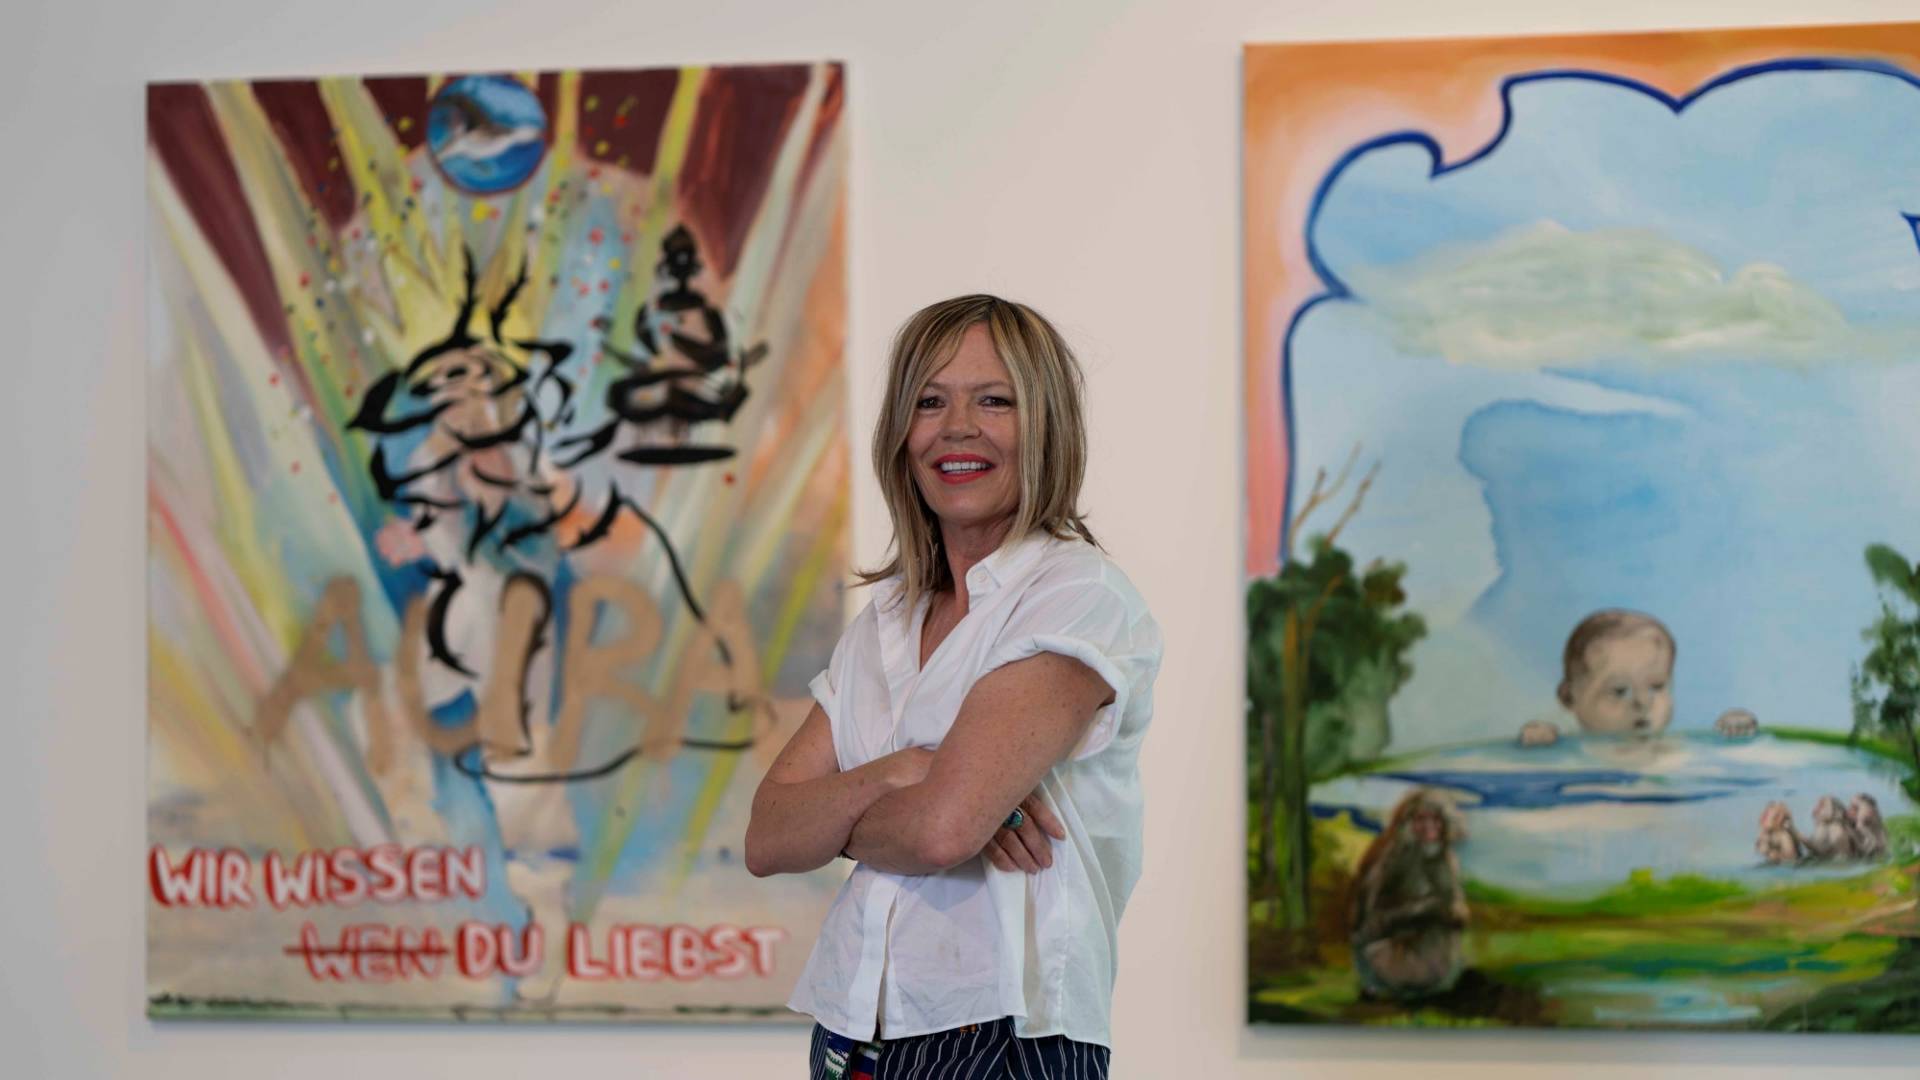 The artist flanked by two of her paintings. They are brightly painted canvases.